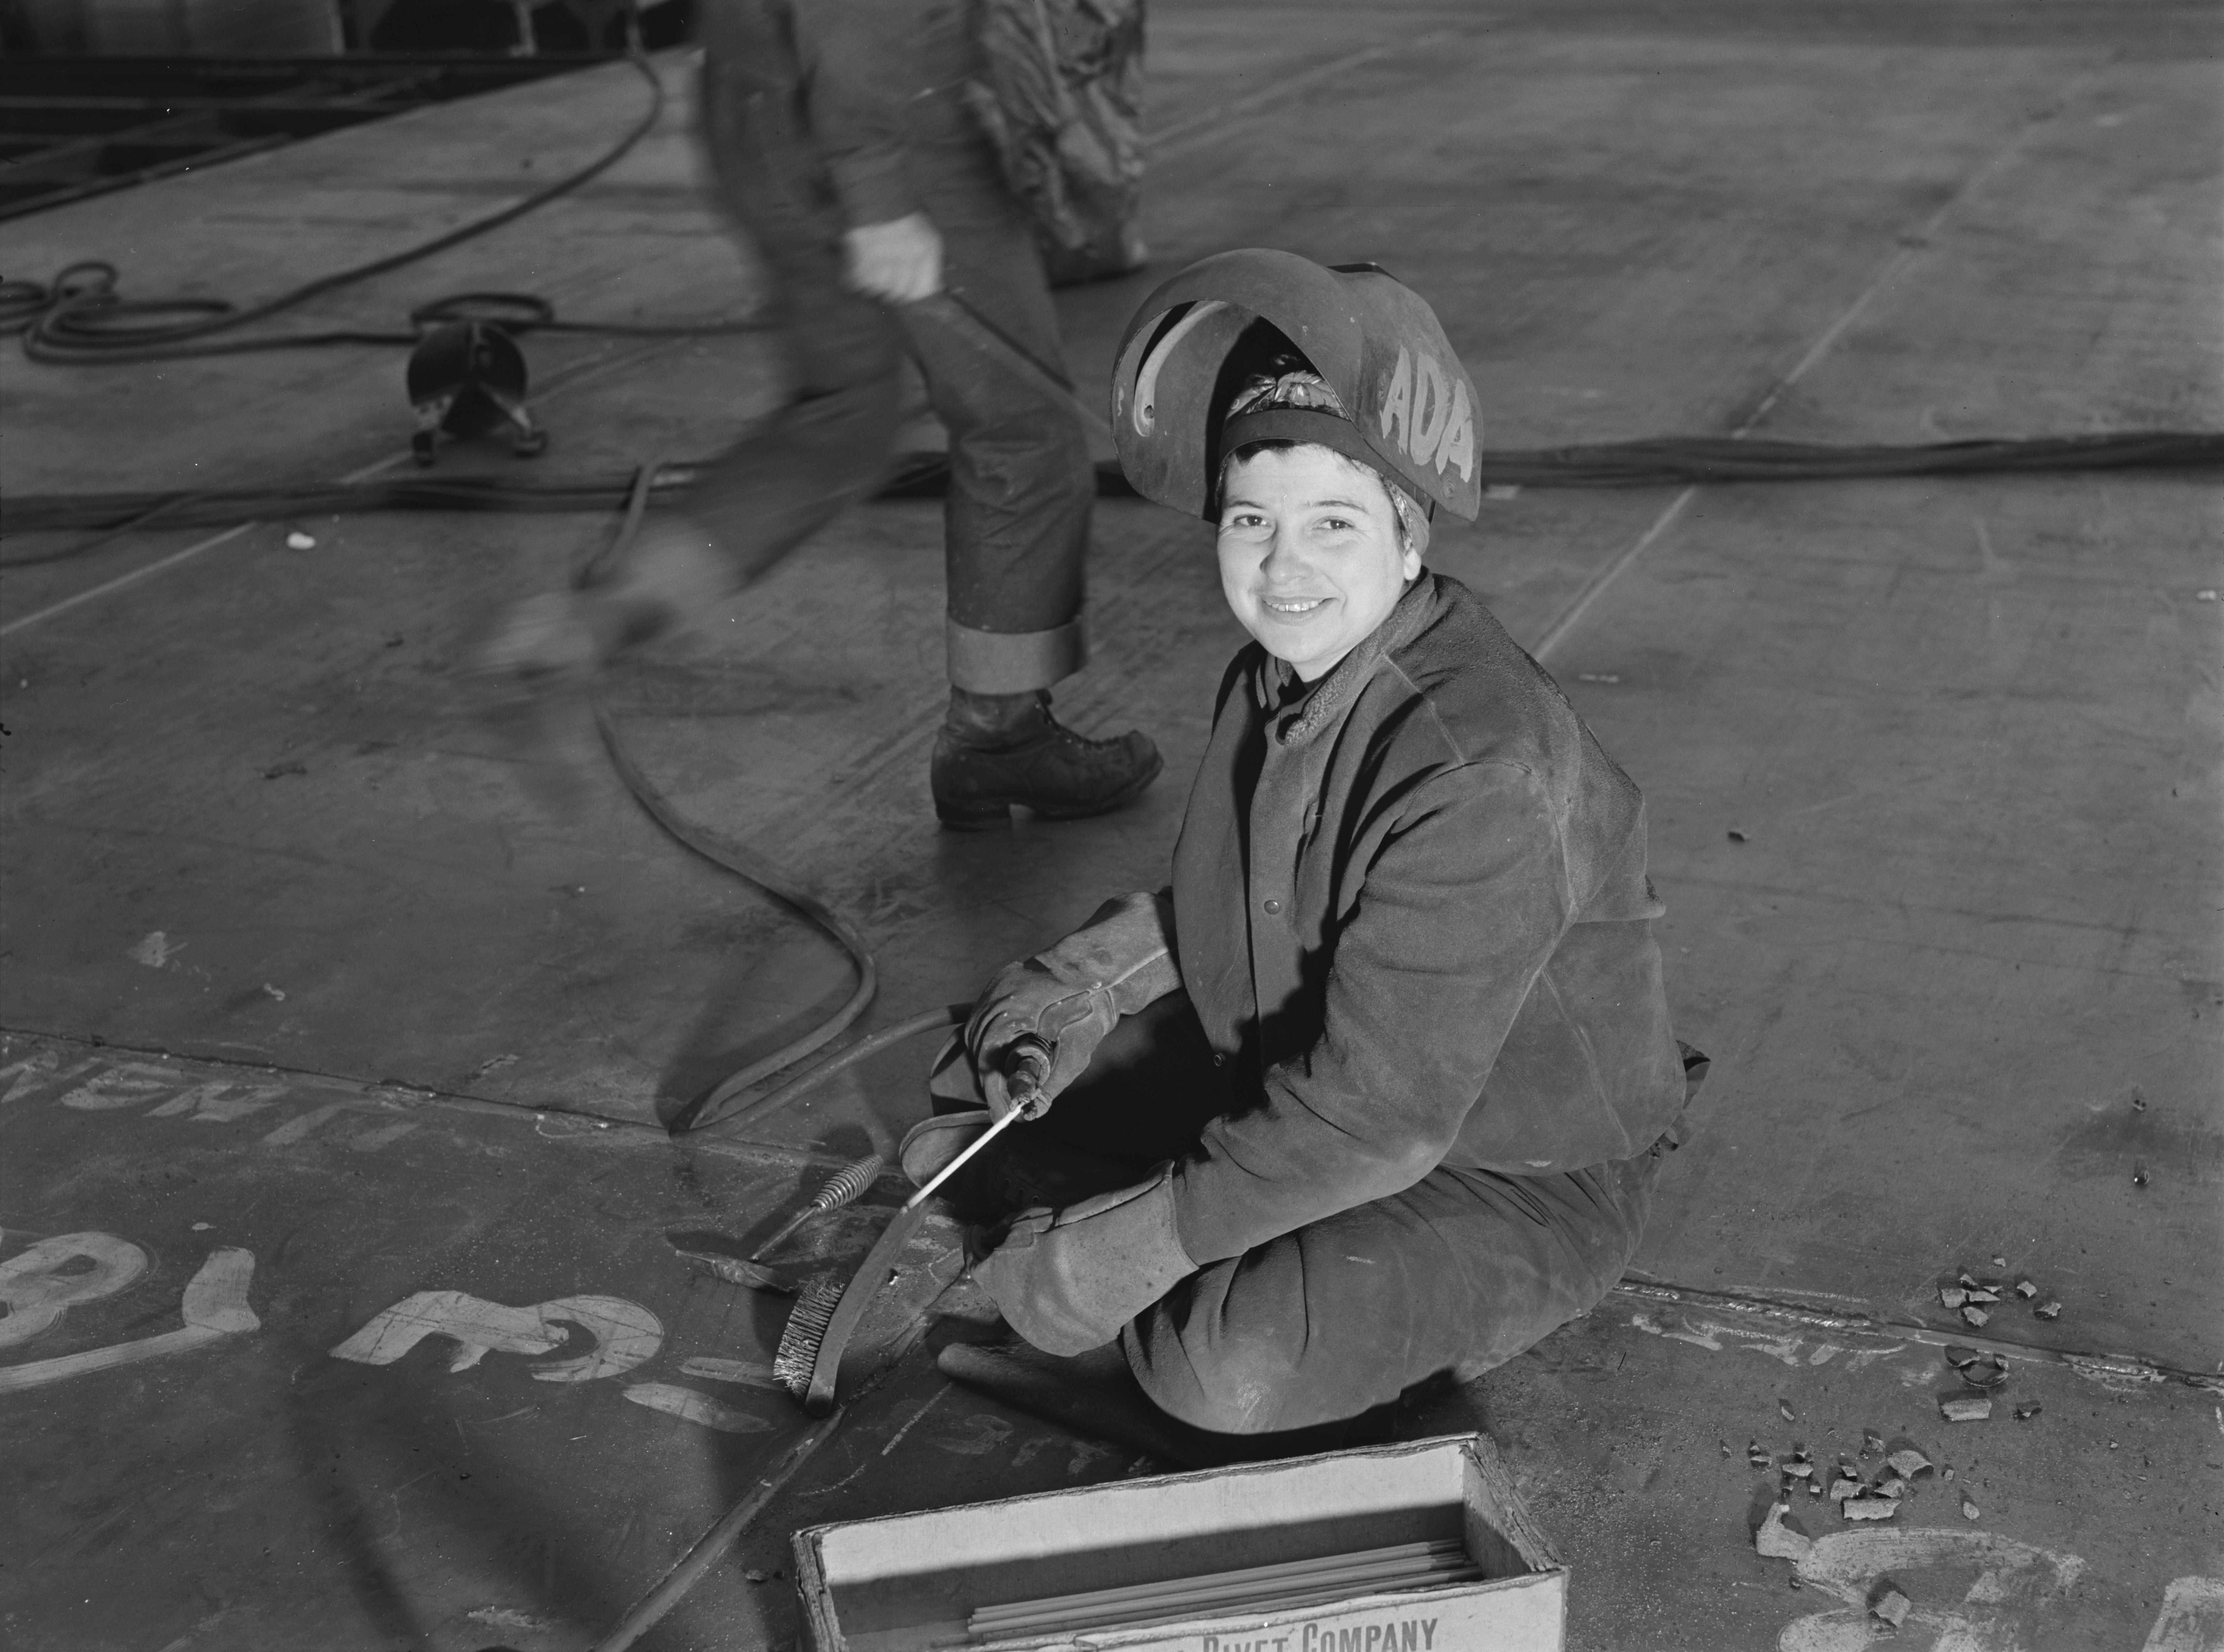 Tending the Homefront The Many Roles of Women in the San Francisco Bay Area During World War II (U.S